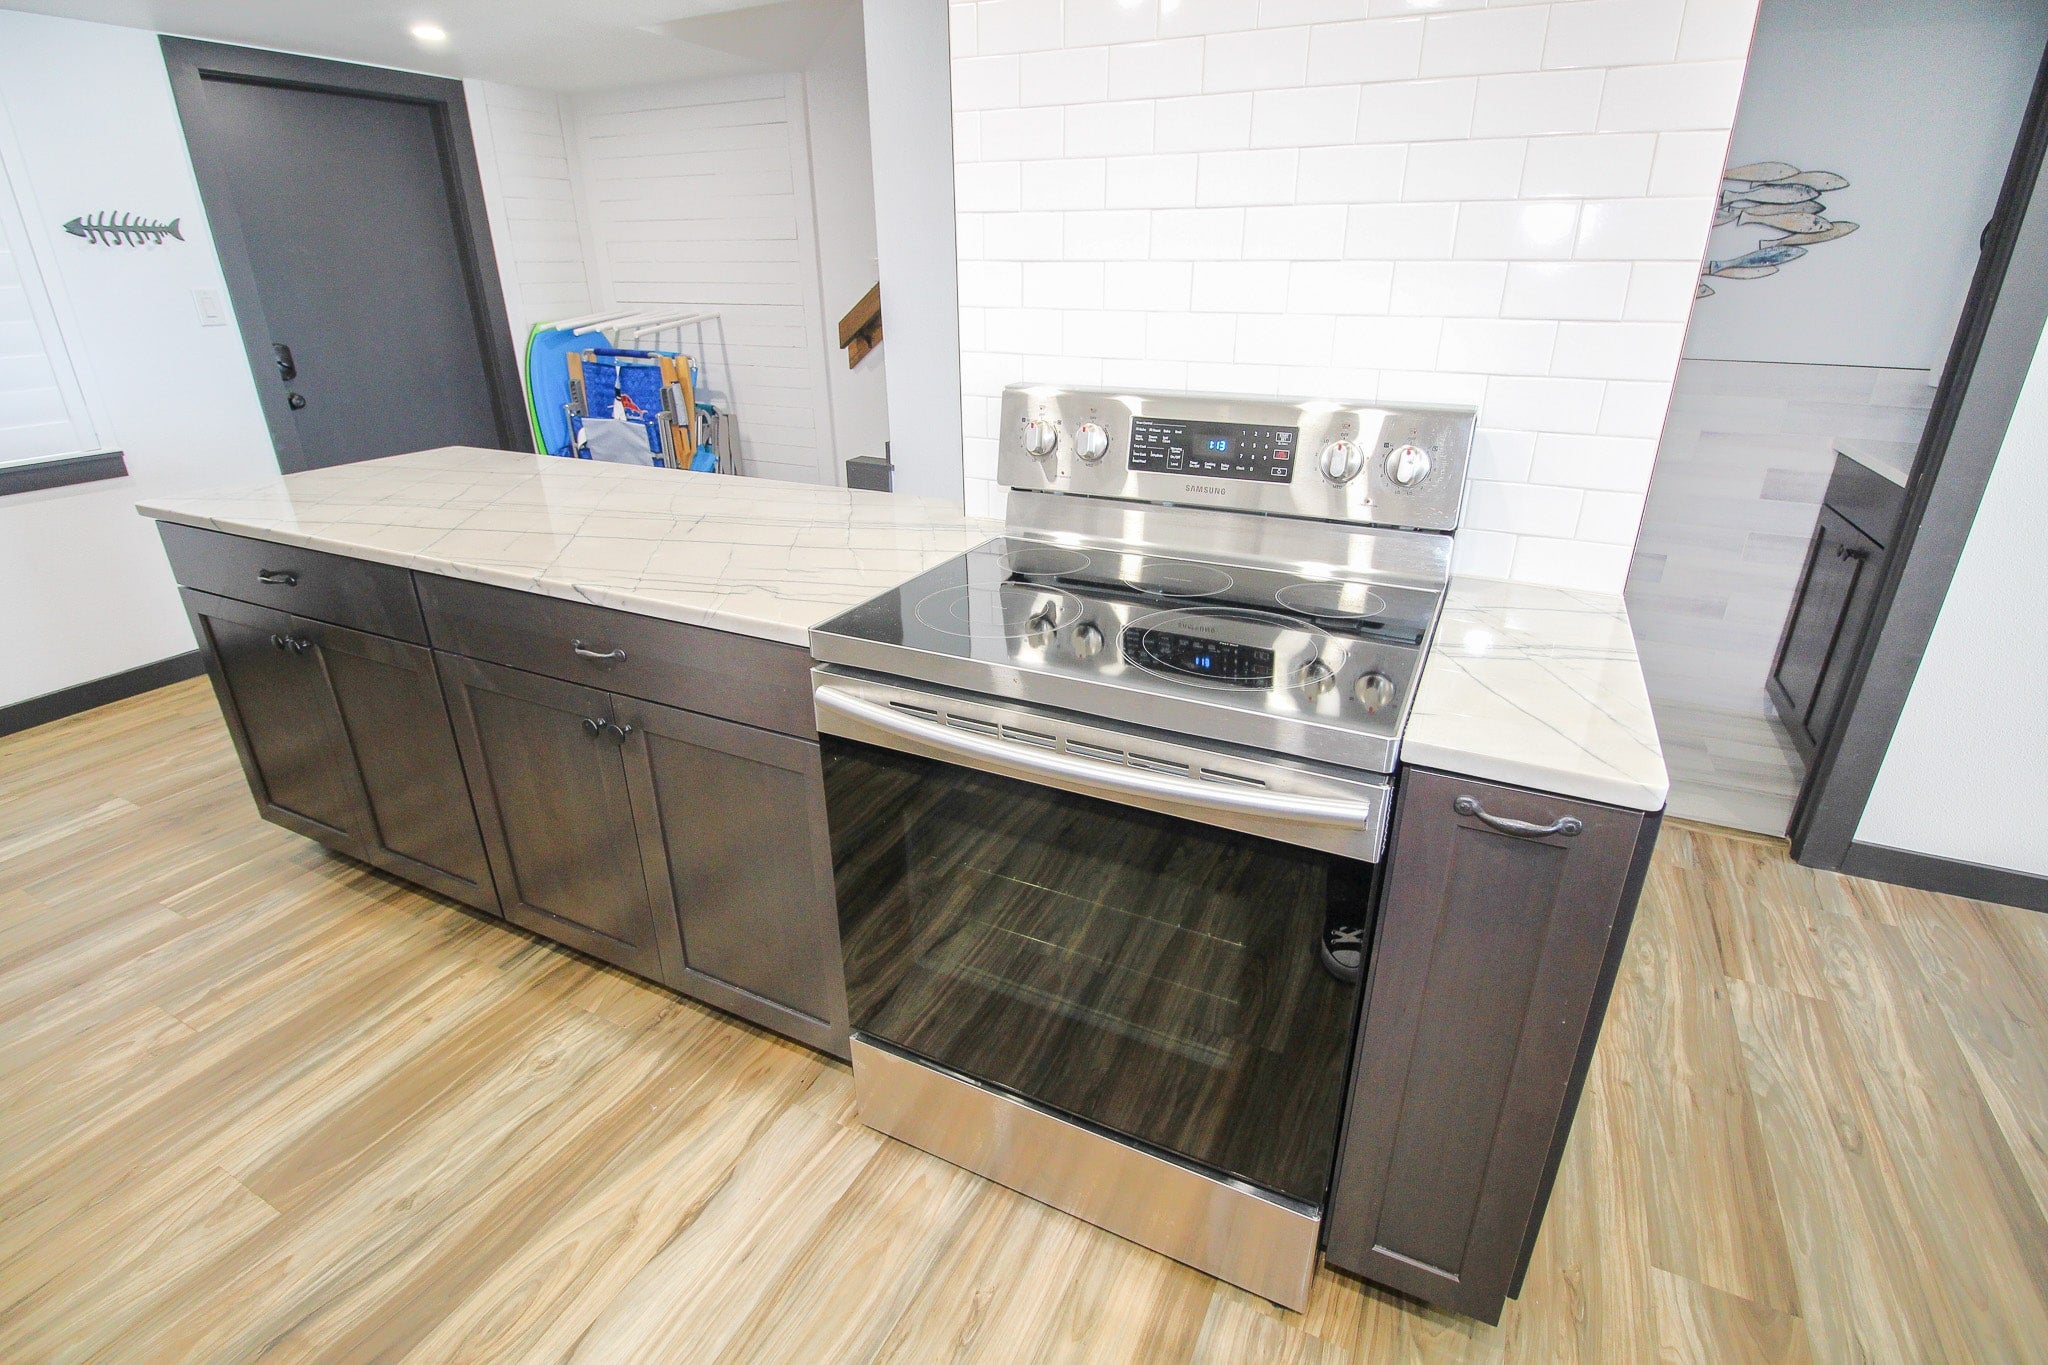 Ample space to cook up delicious meals